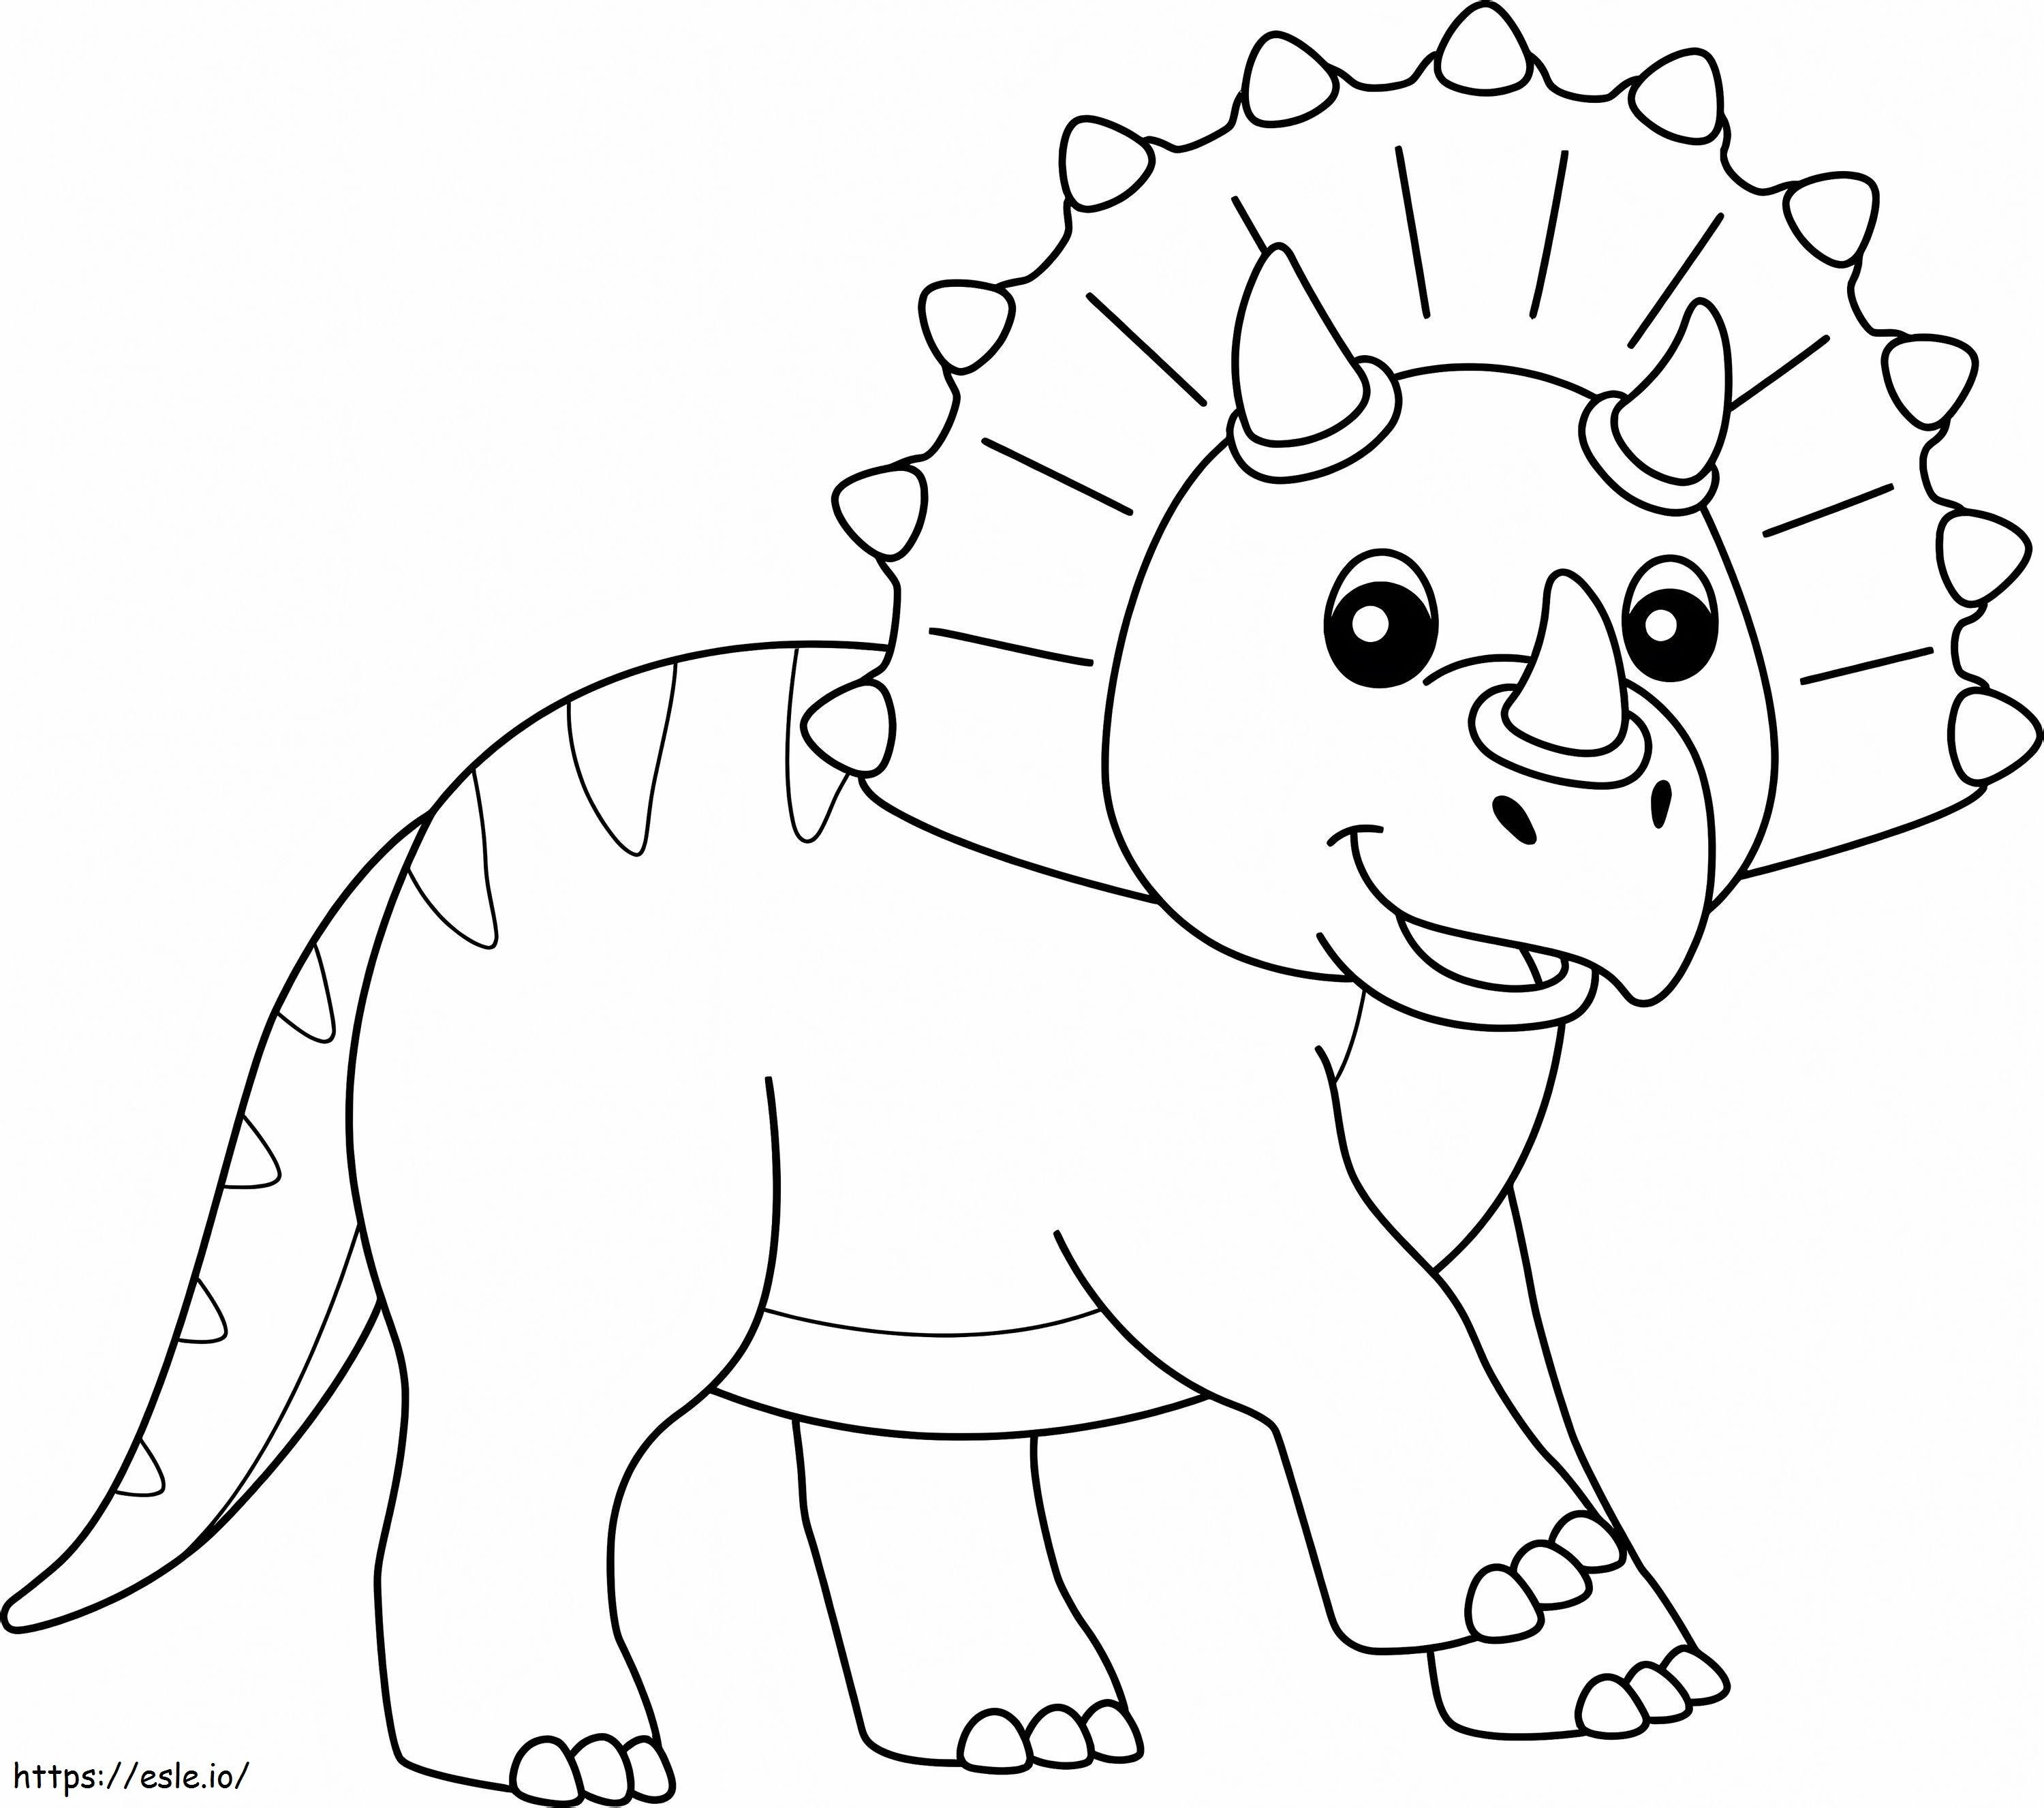 Funny Triceratop coloring page